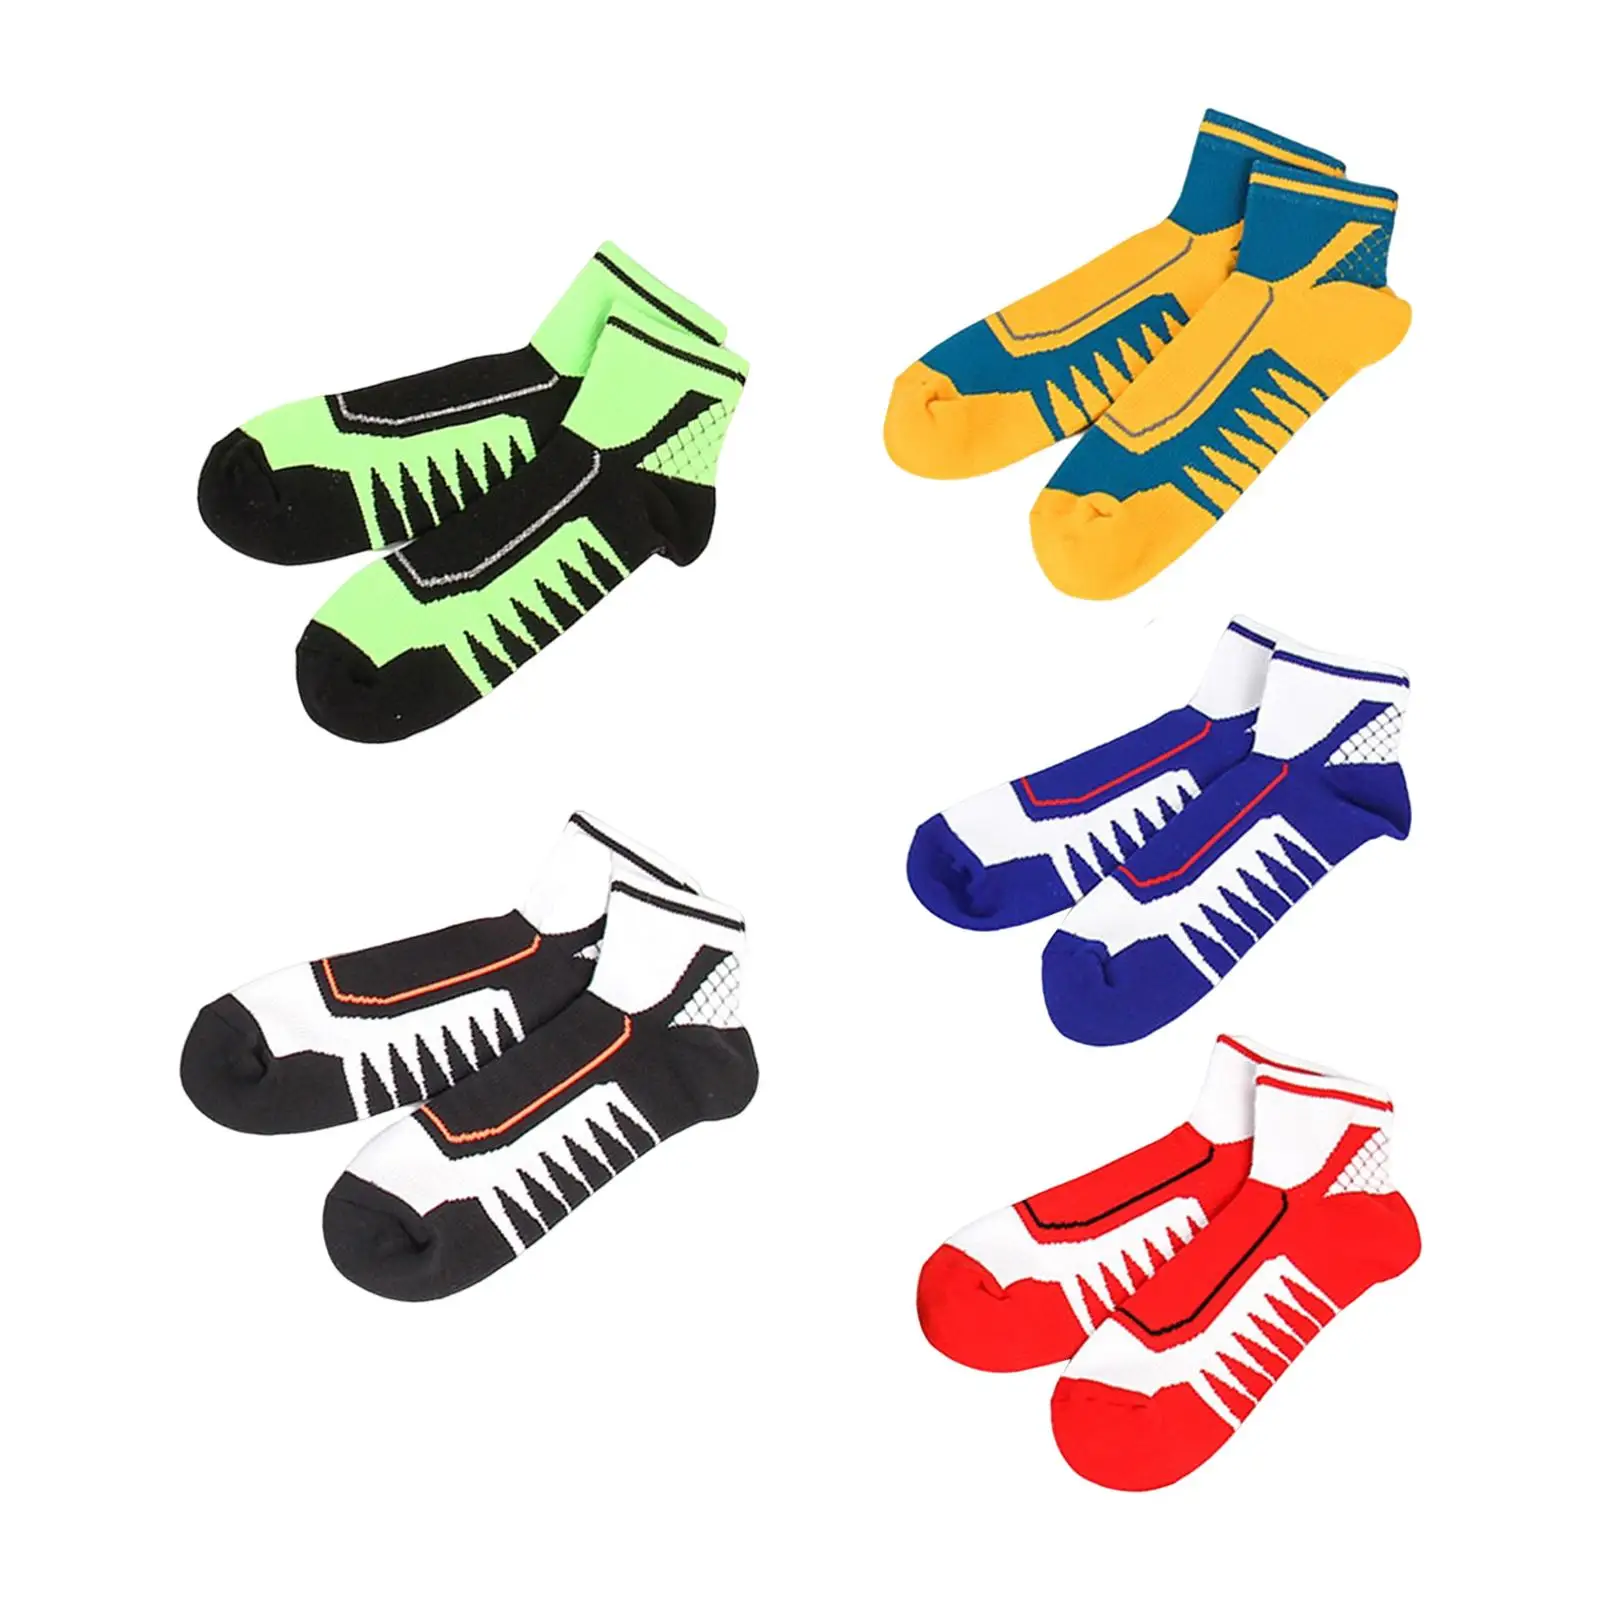 Thick 5 Pairs Men Crew Socks Comfortable Soft Pattern Decorative Warm Athletic Sports Ankle Socks for New Year Soccer Running